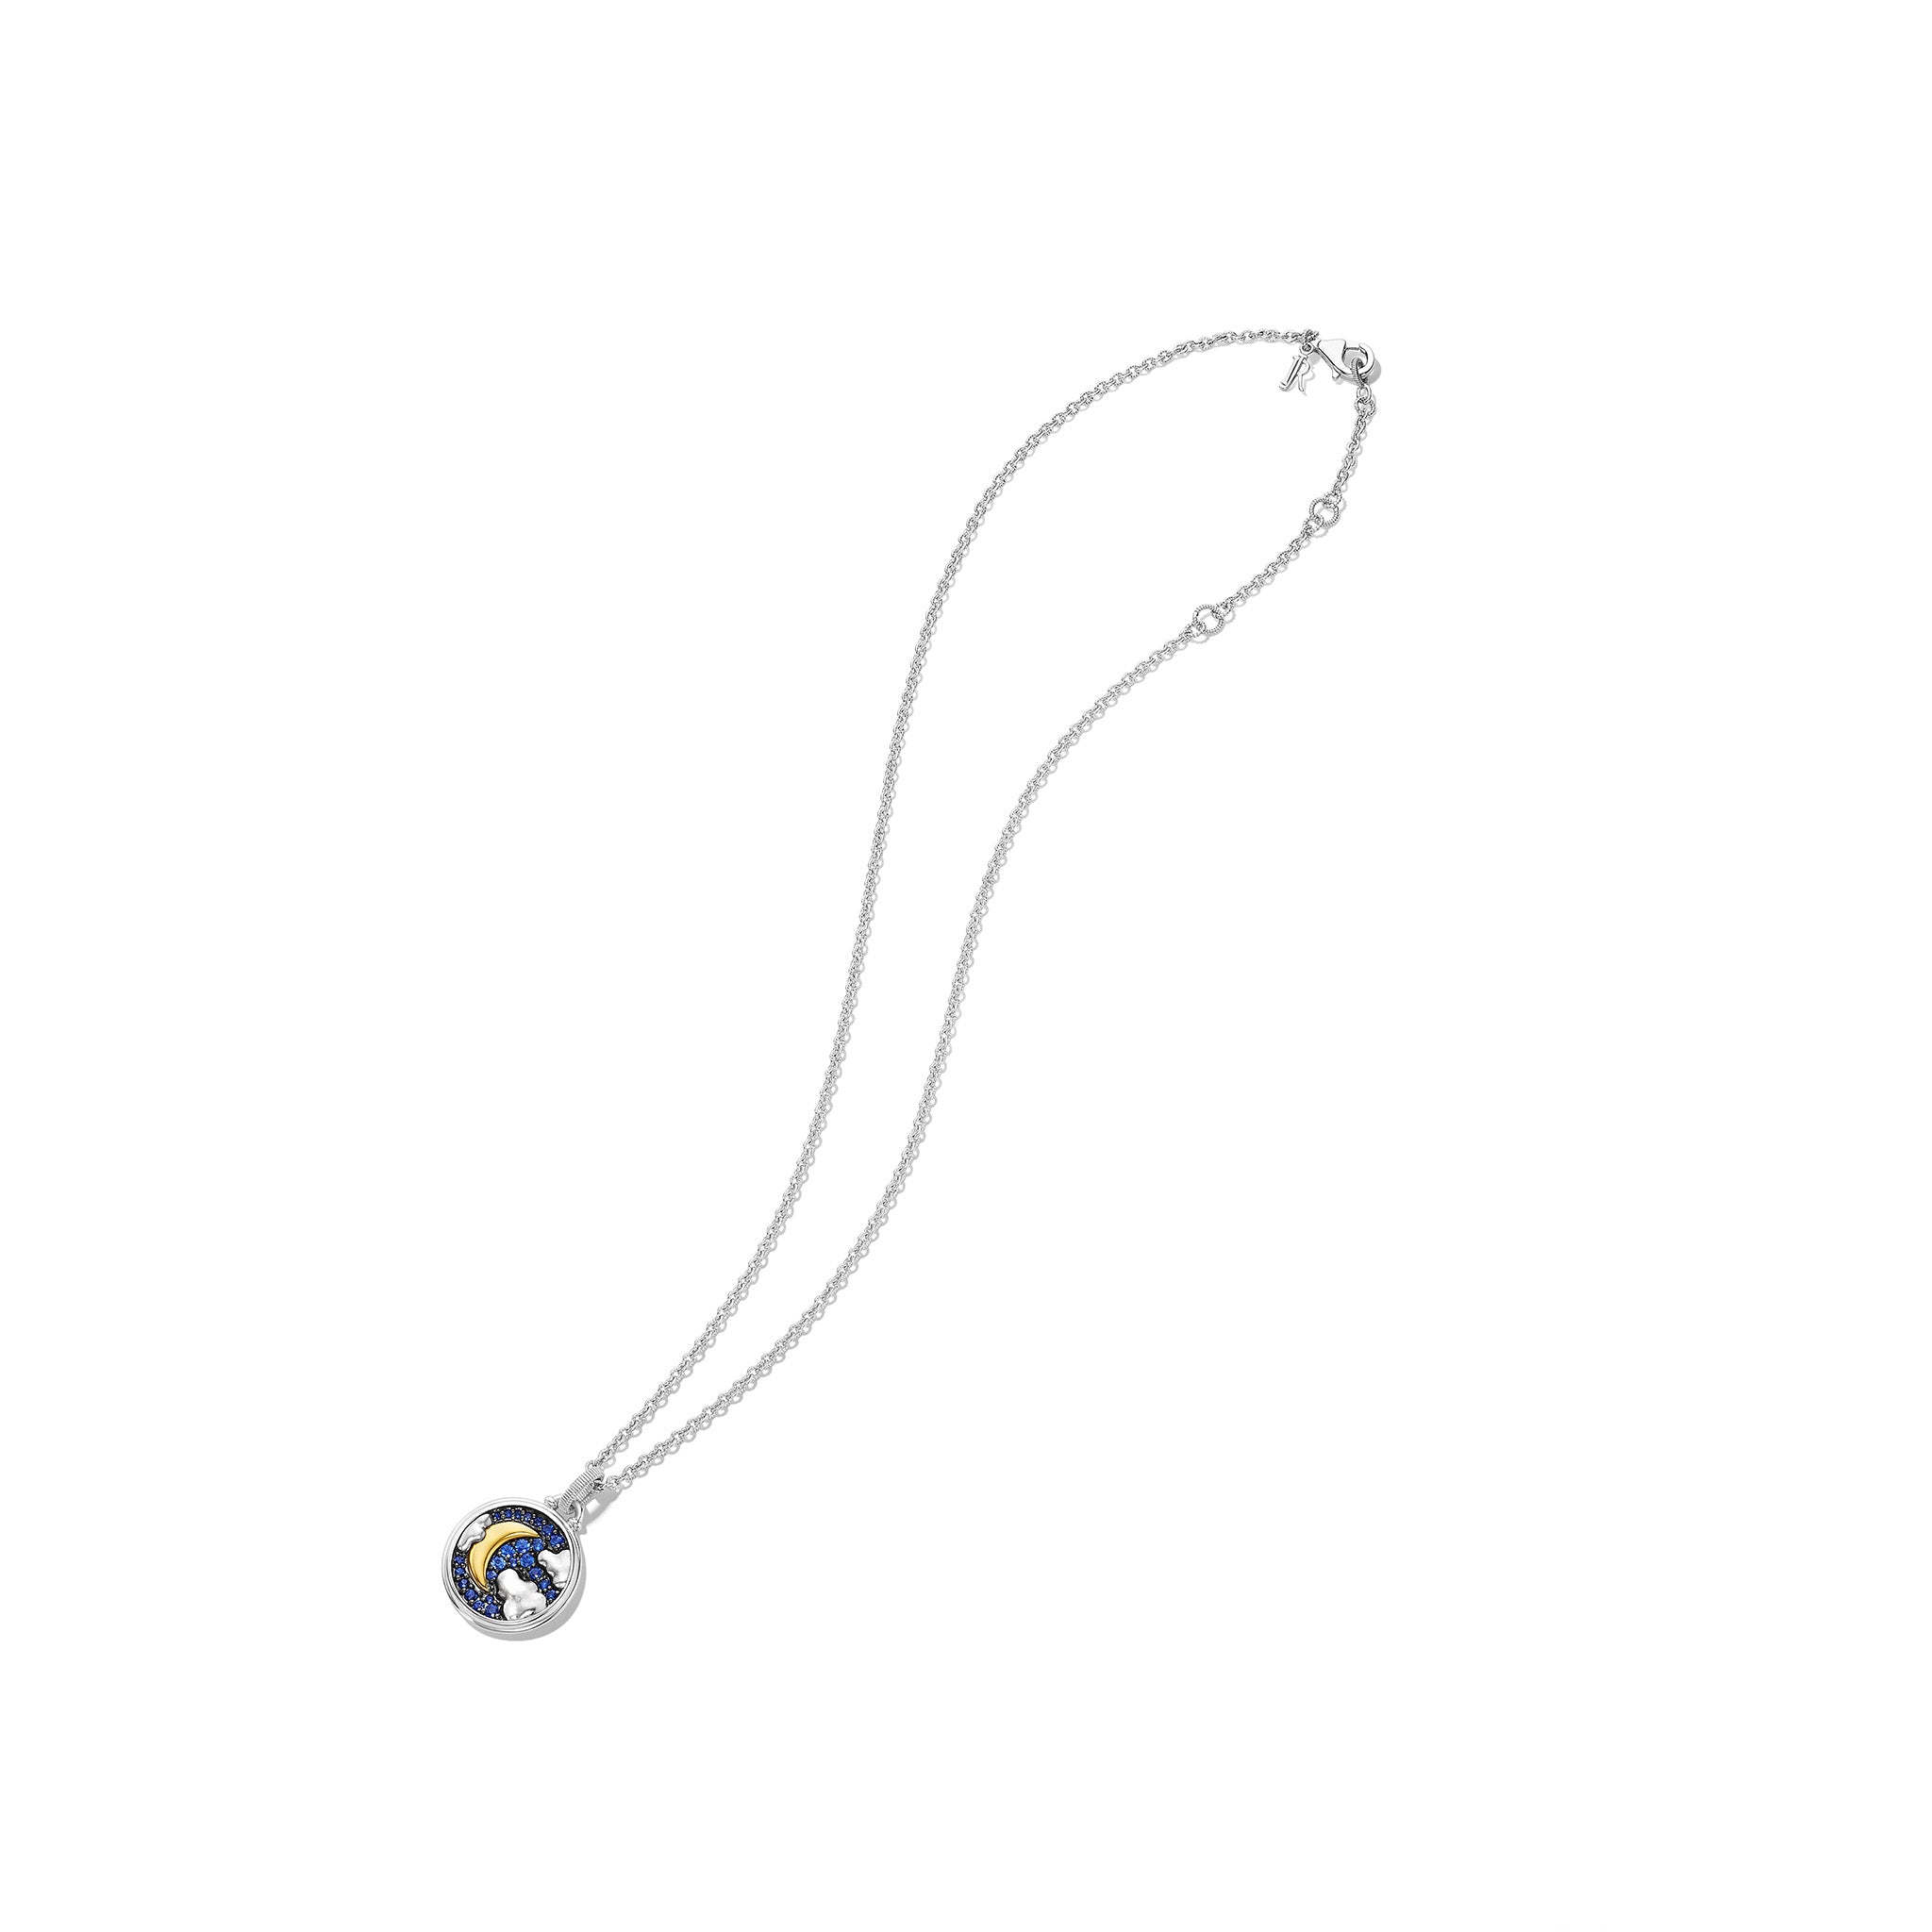 Little Luxuries Night Sky Medallion Necklace with Blue Sapphire, Diamonds and 18K Gold